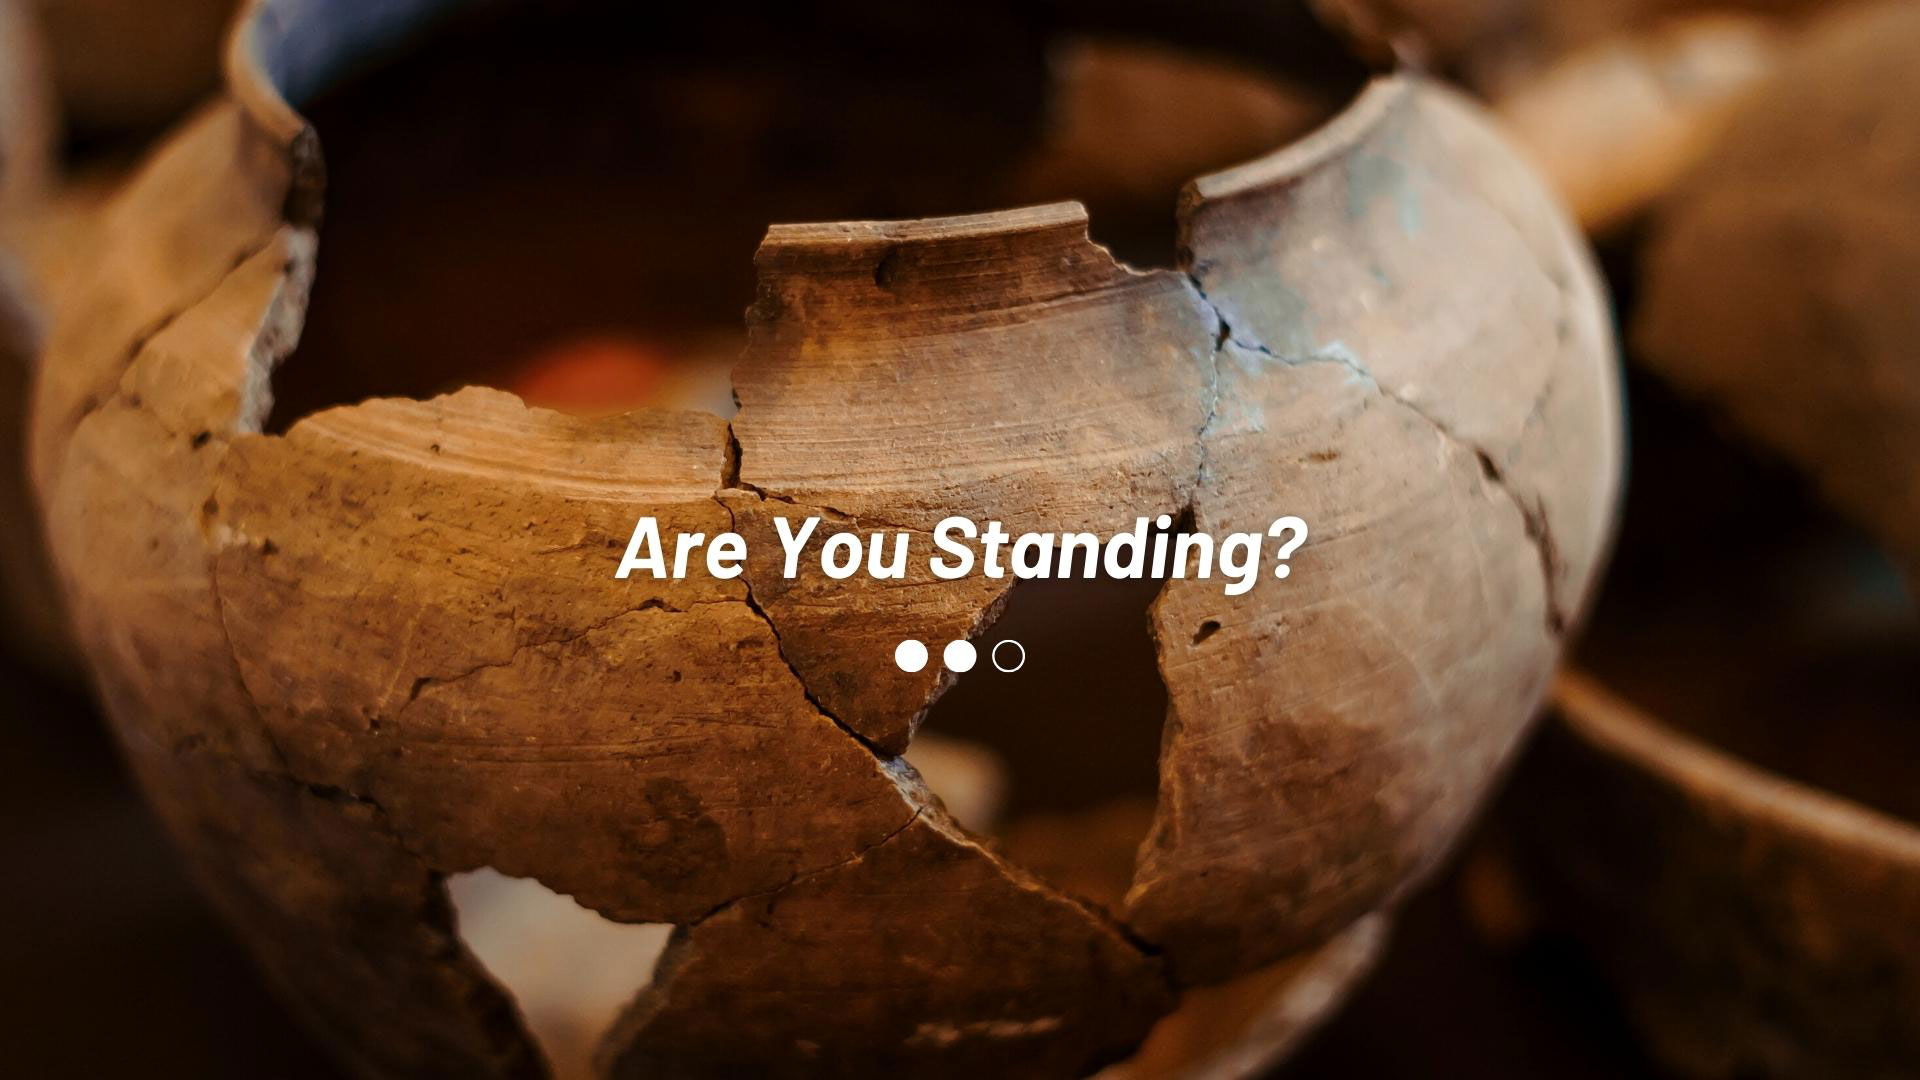 Series: Are You Standing?